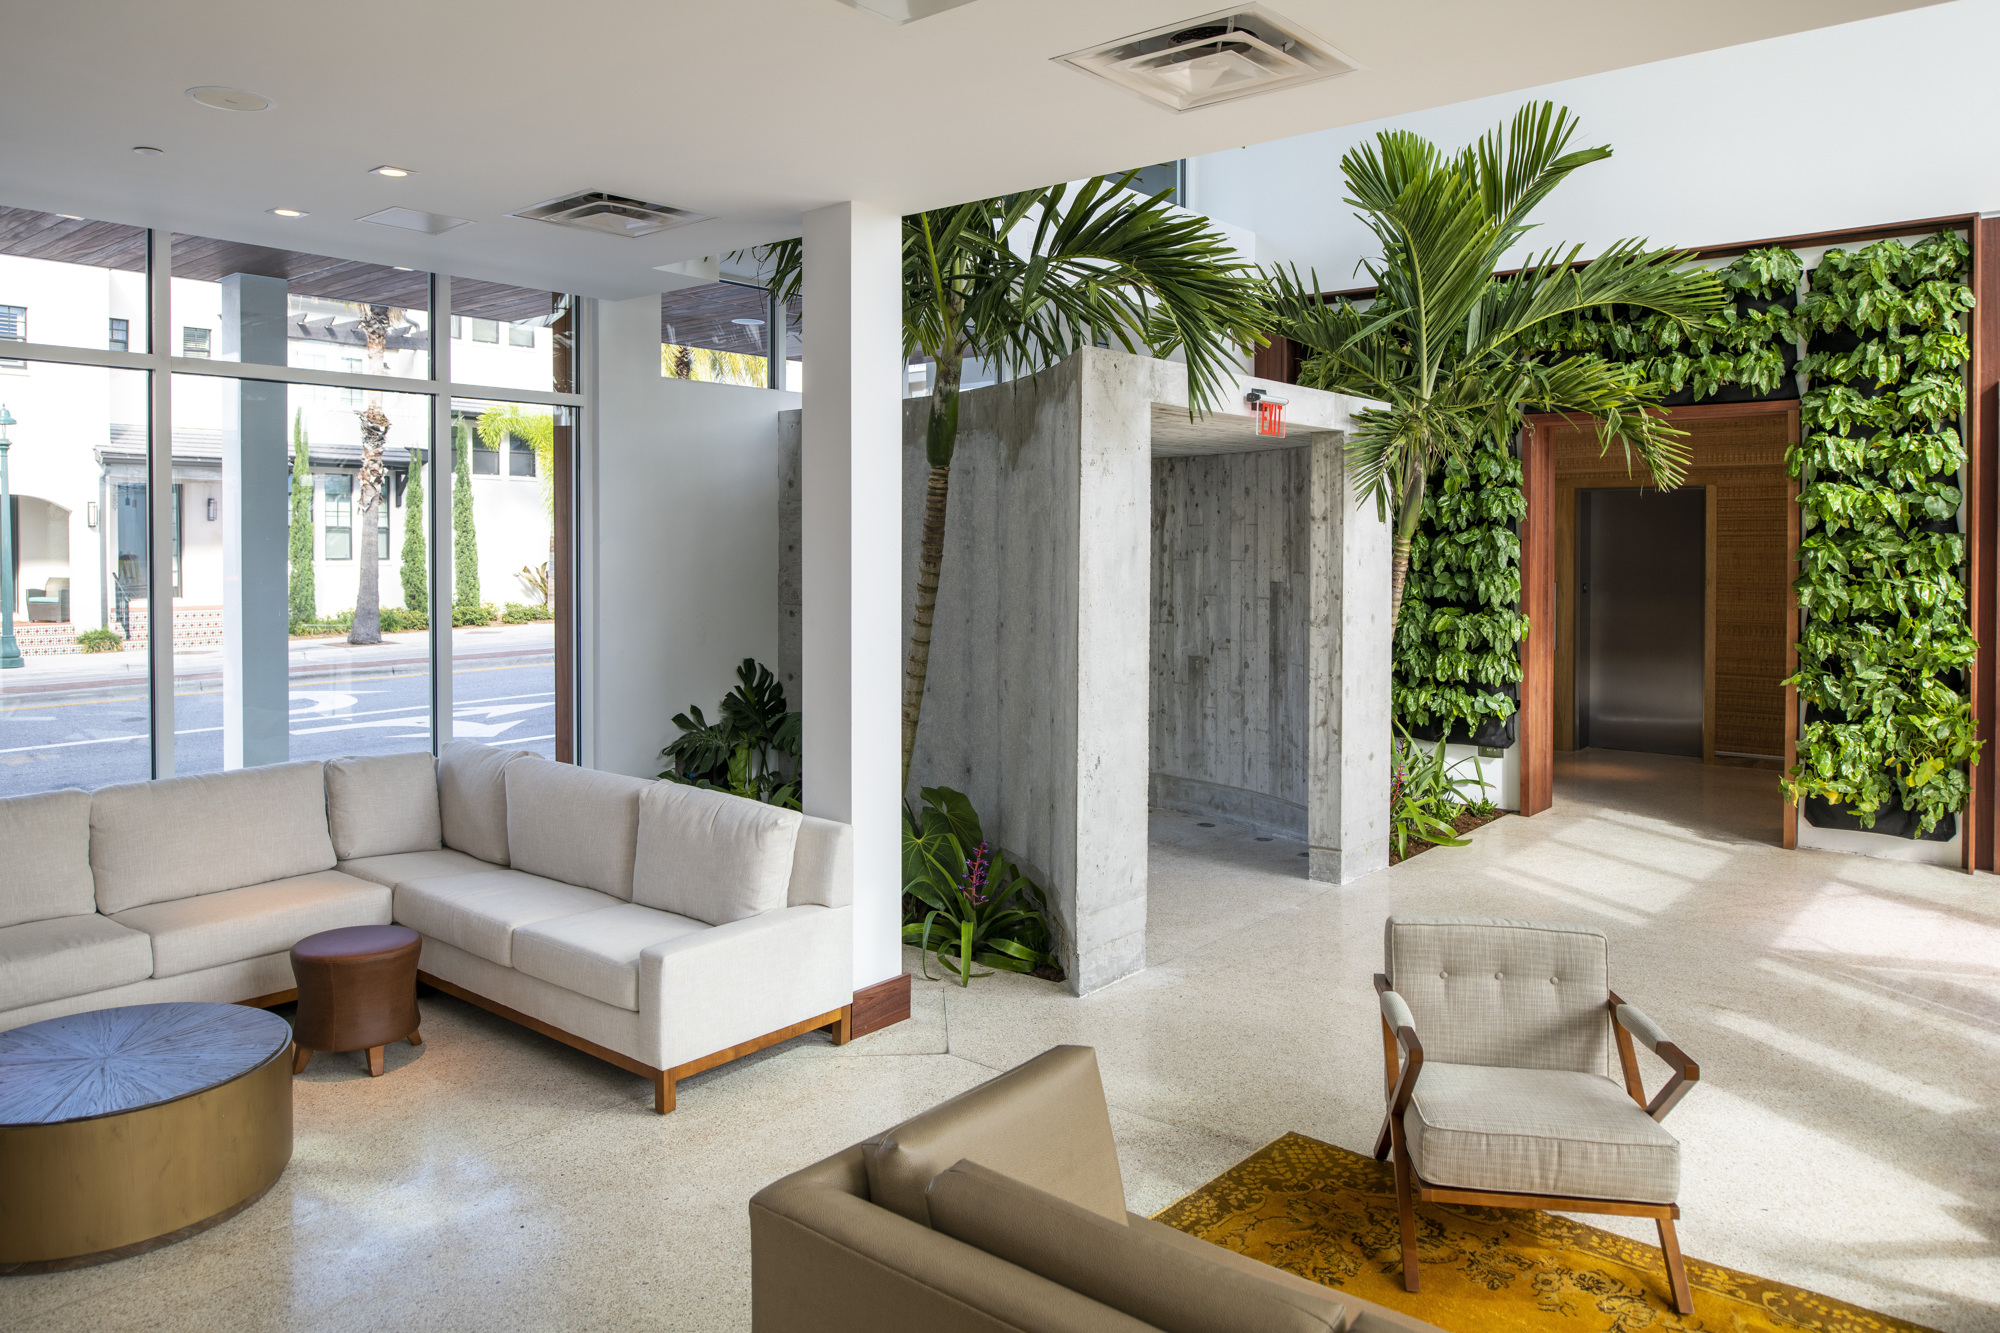 Courtesy. The Sarasota Modern hotel took design inspiration from the Sarasota School of Architecture. 